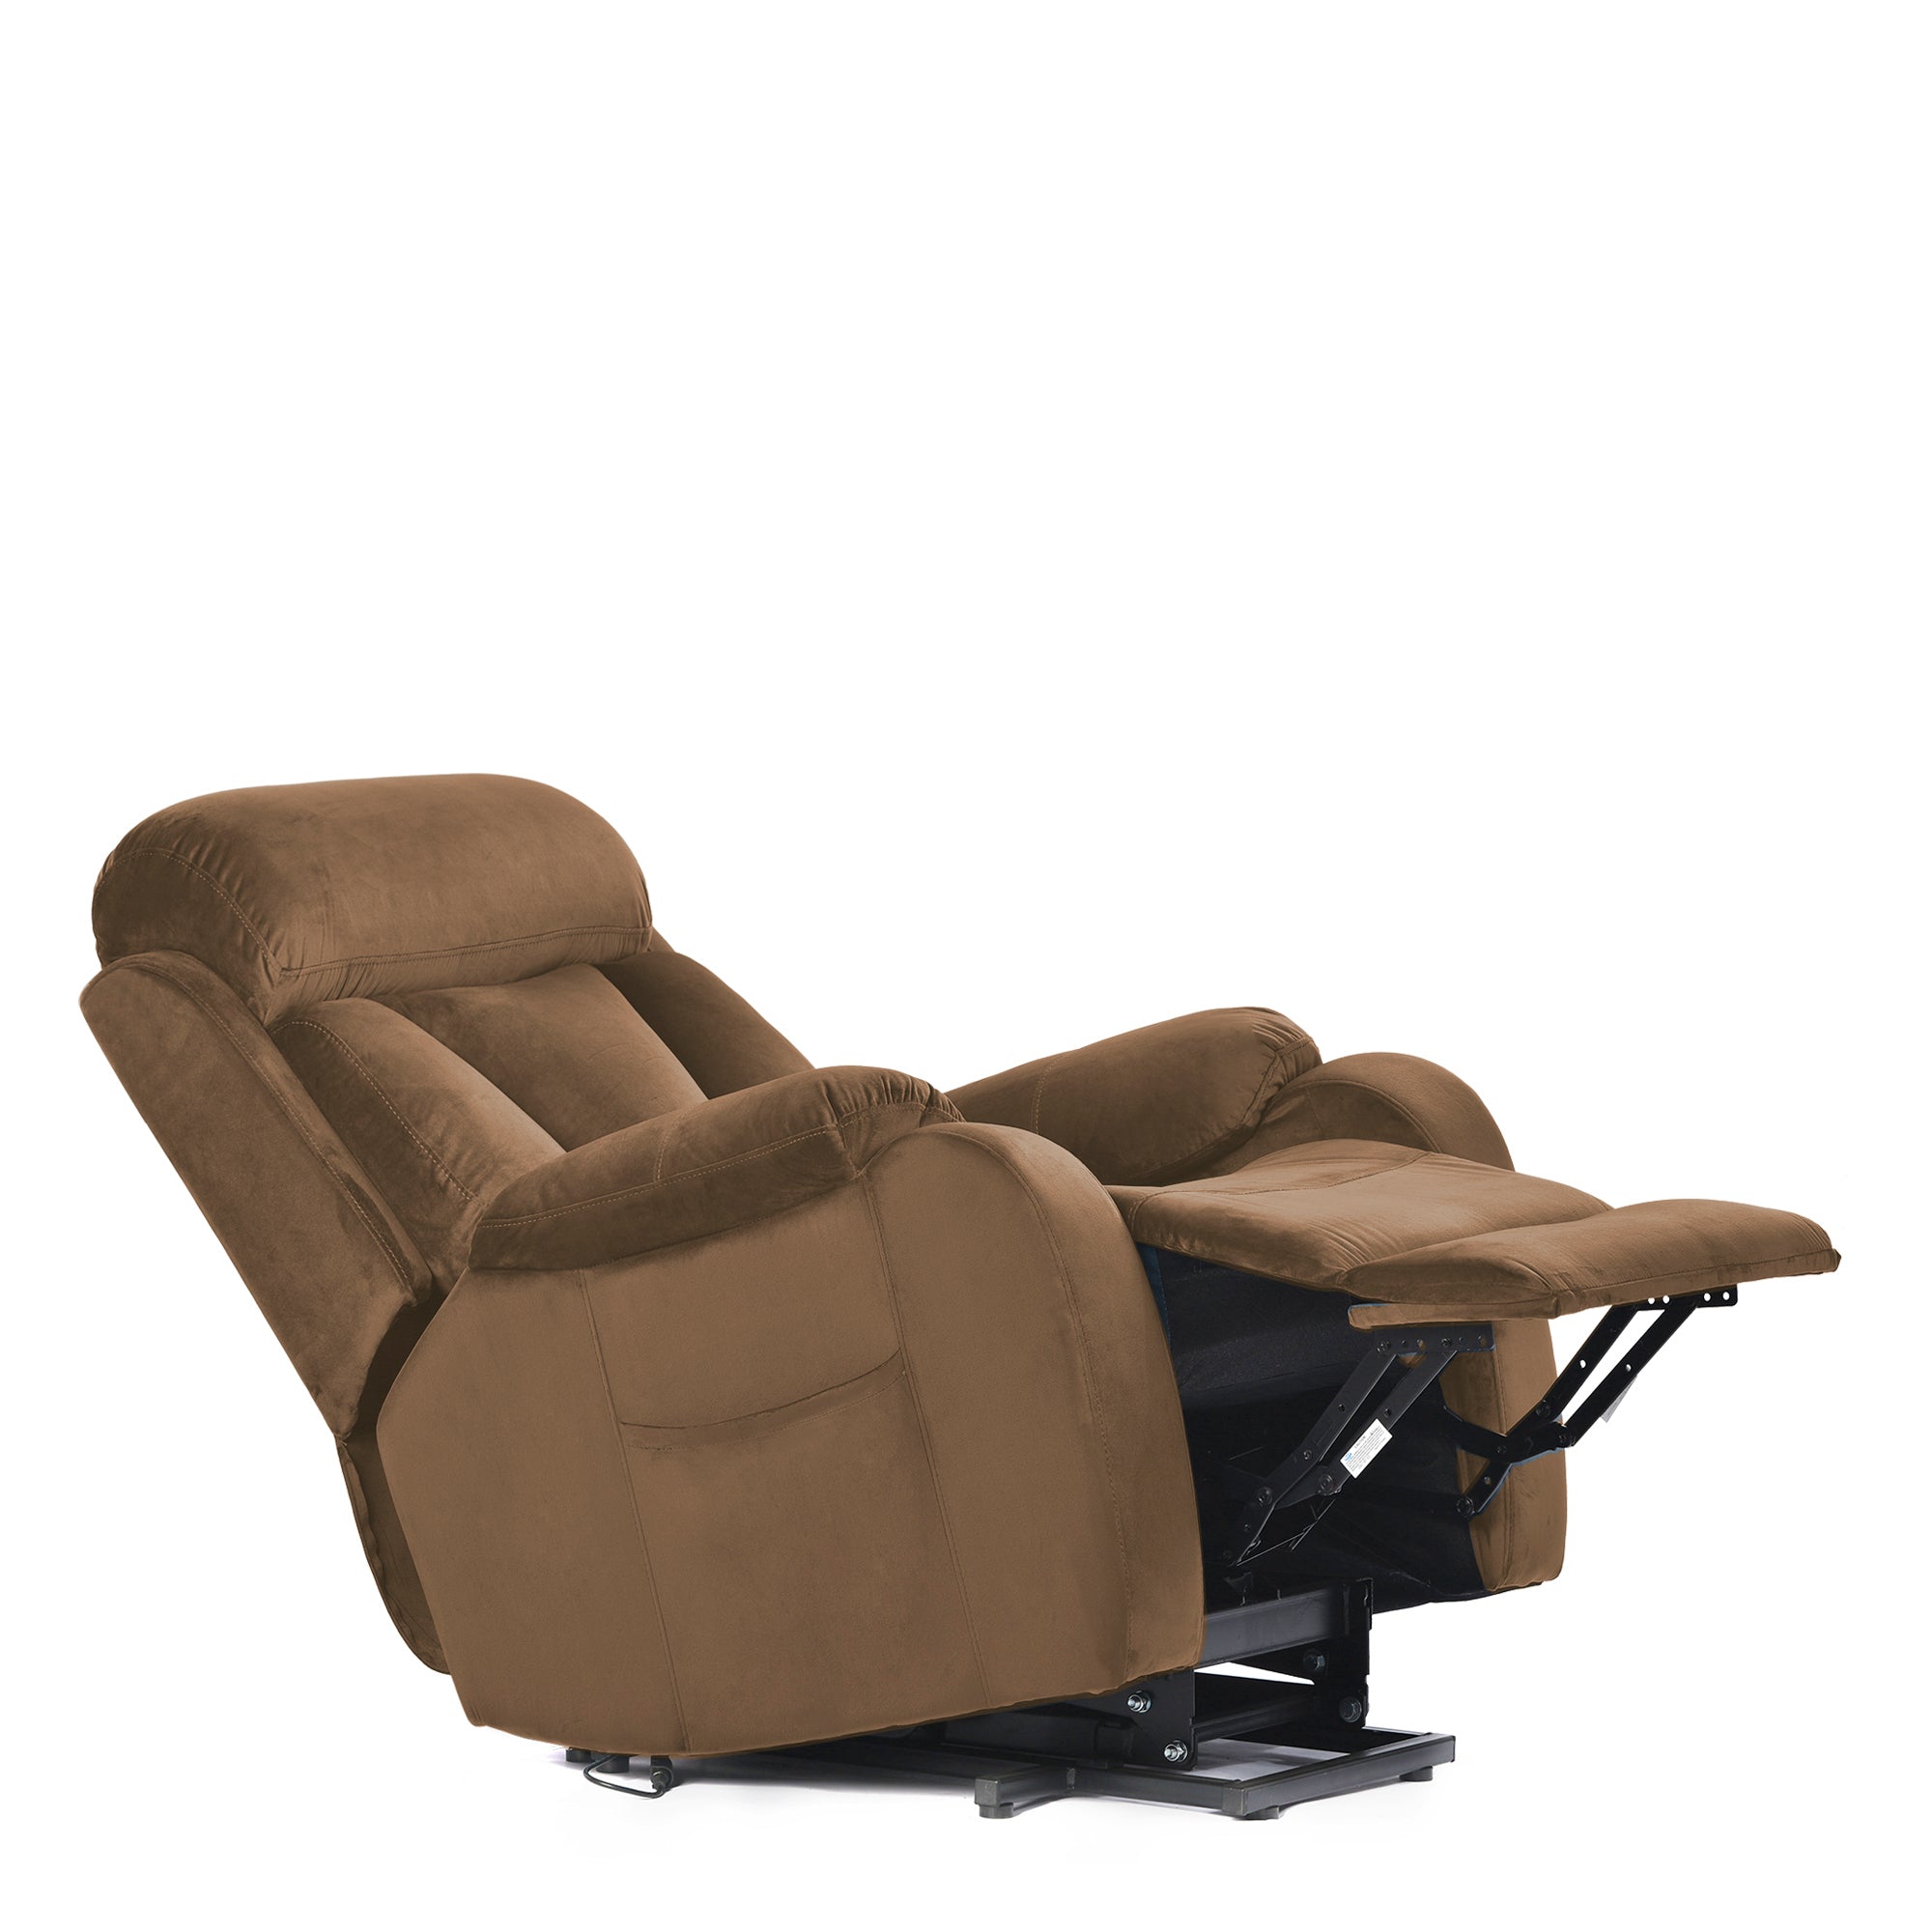 Brown Power Lift Chair Right Profile Headrest and Footrest Extended